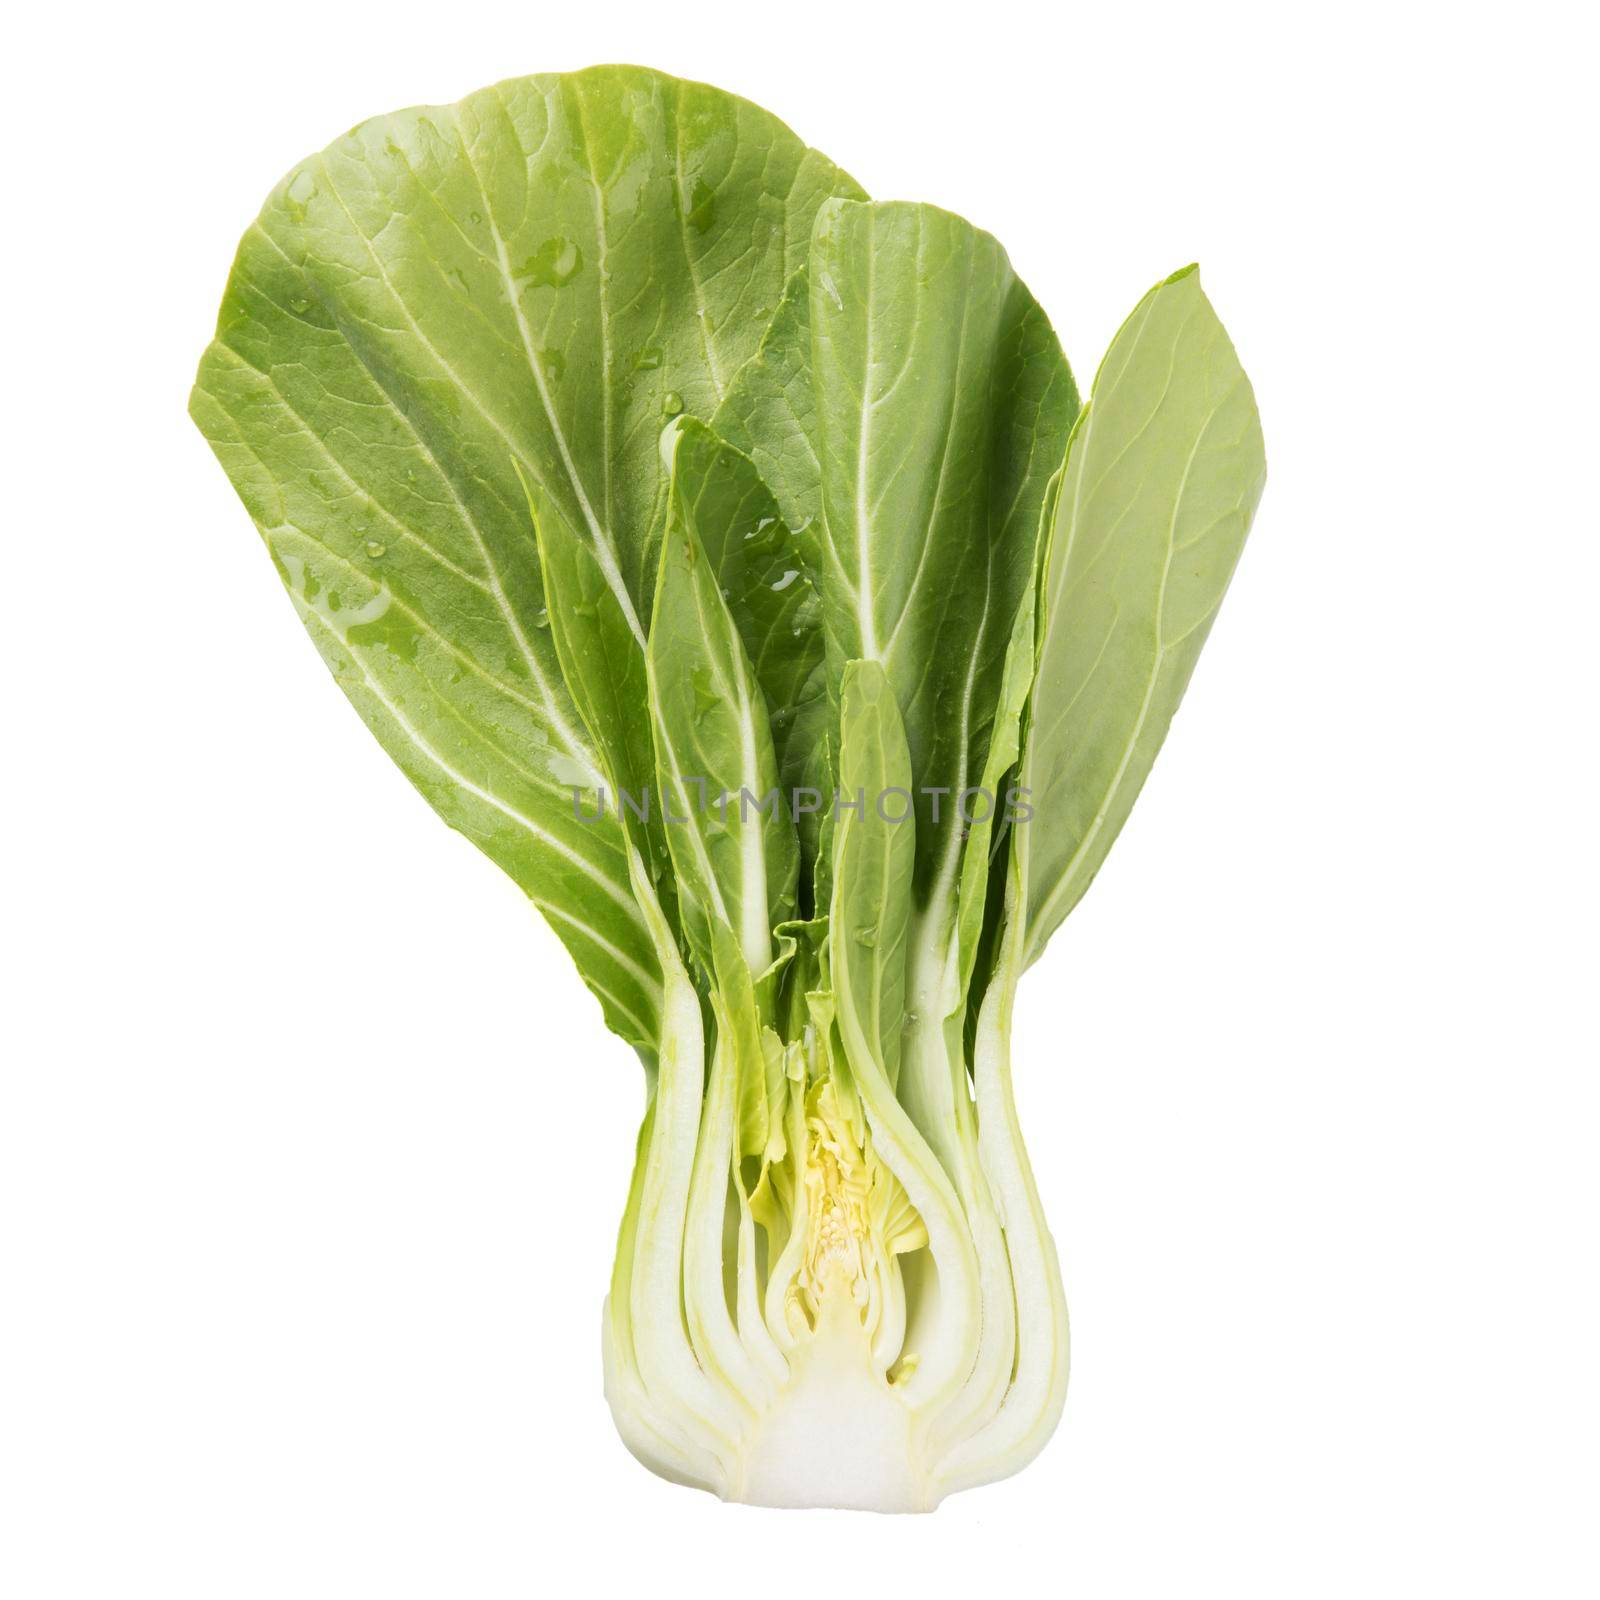 Half of a bok choy isolated on a white background.